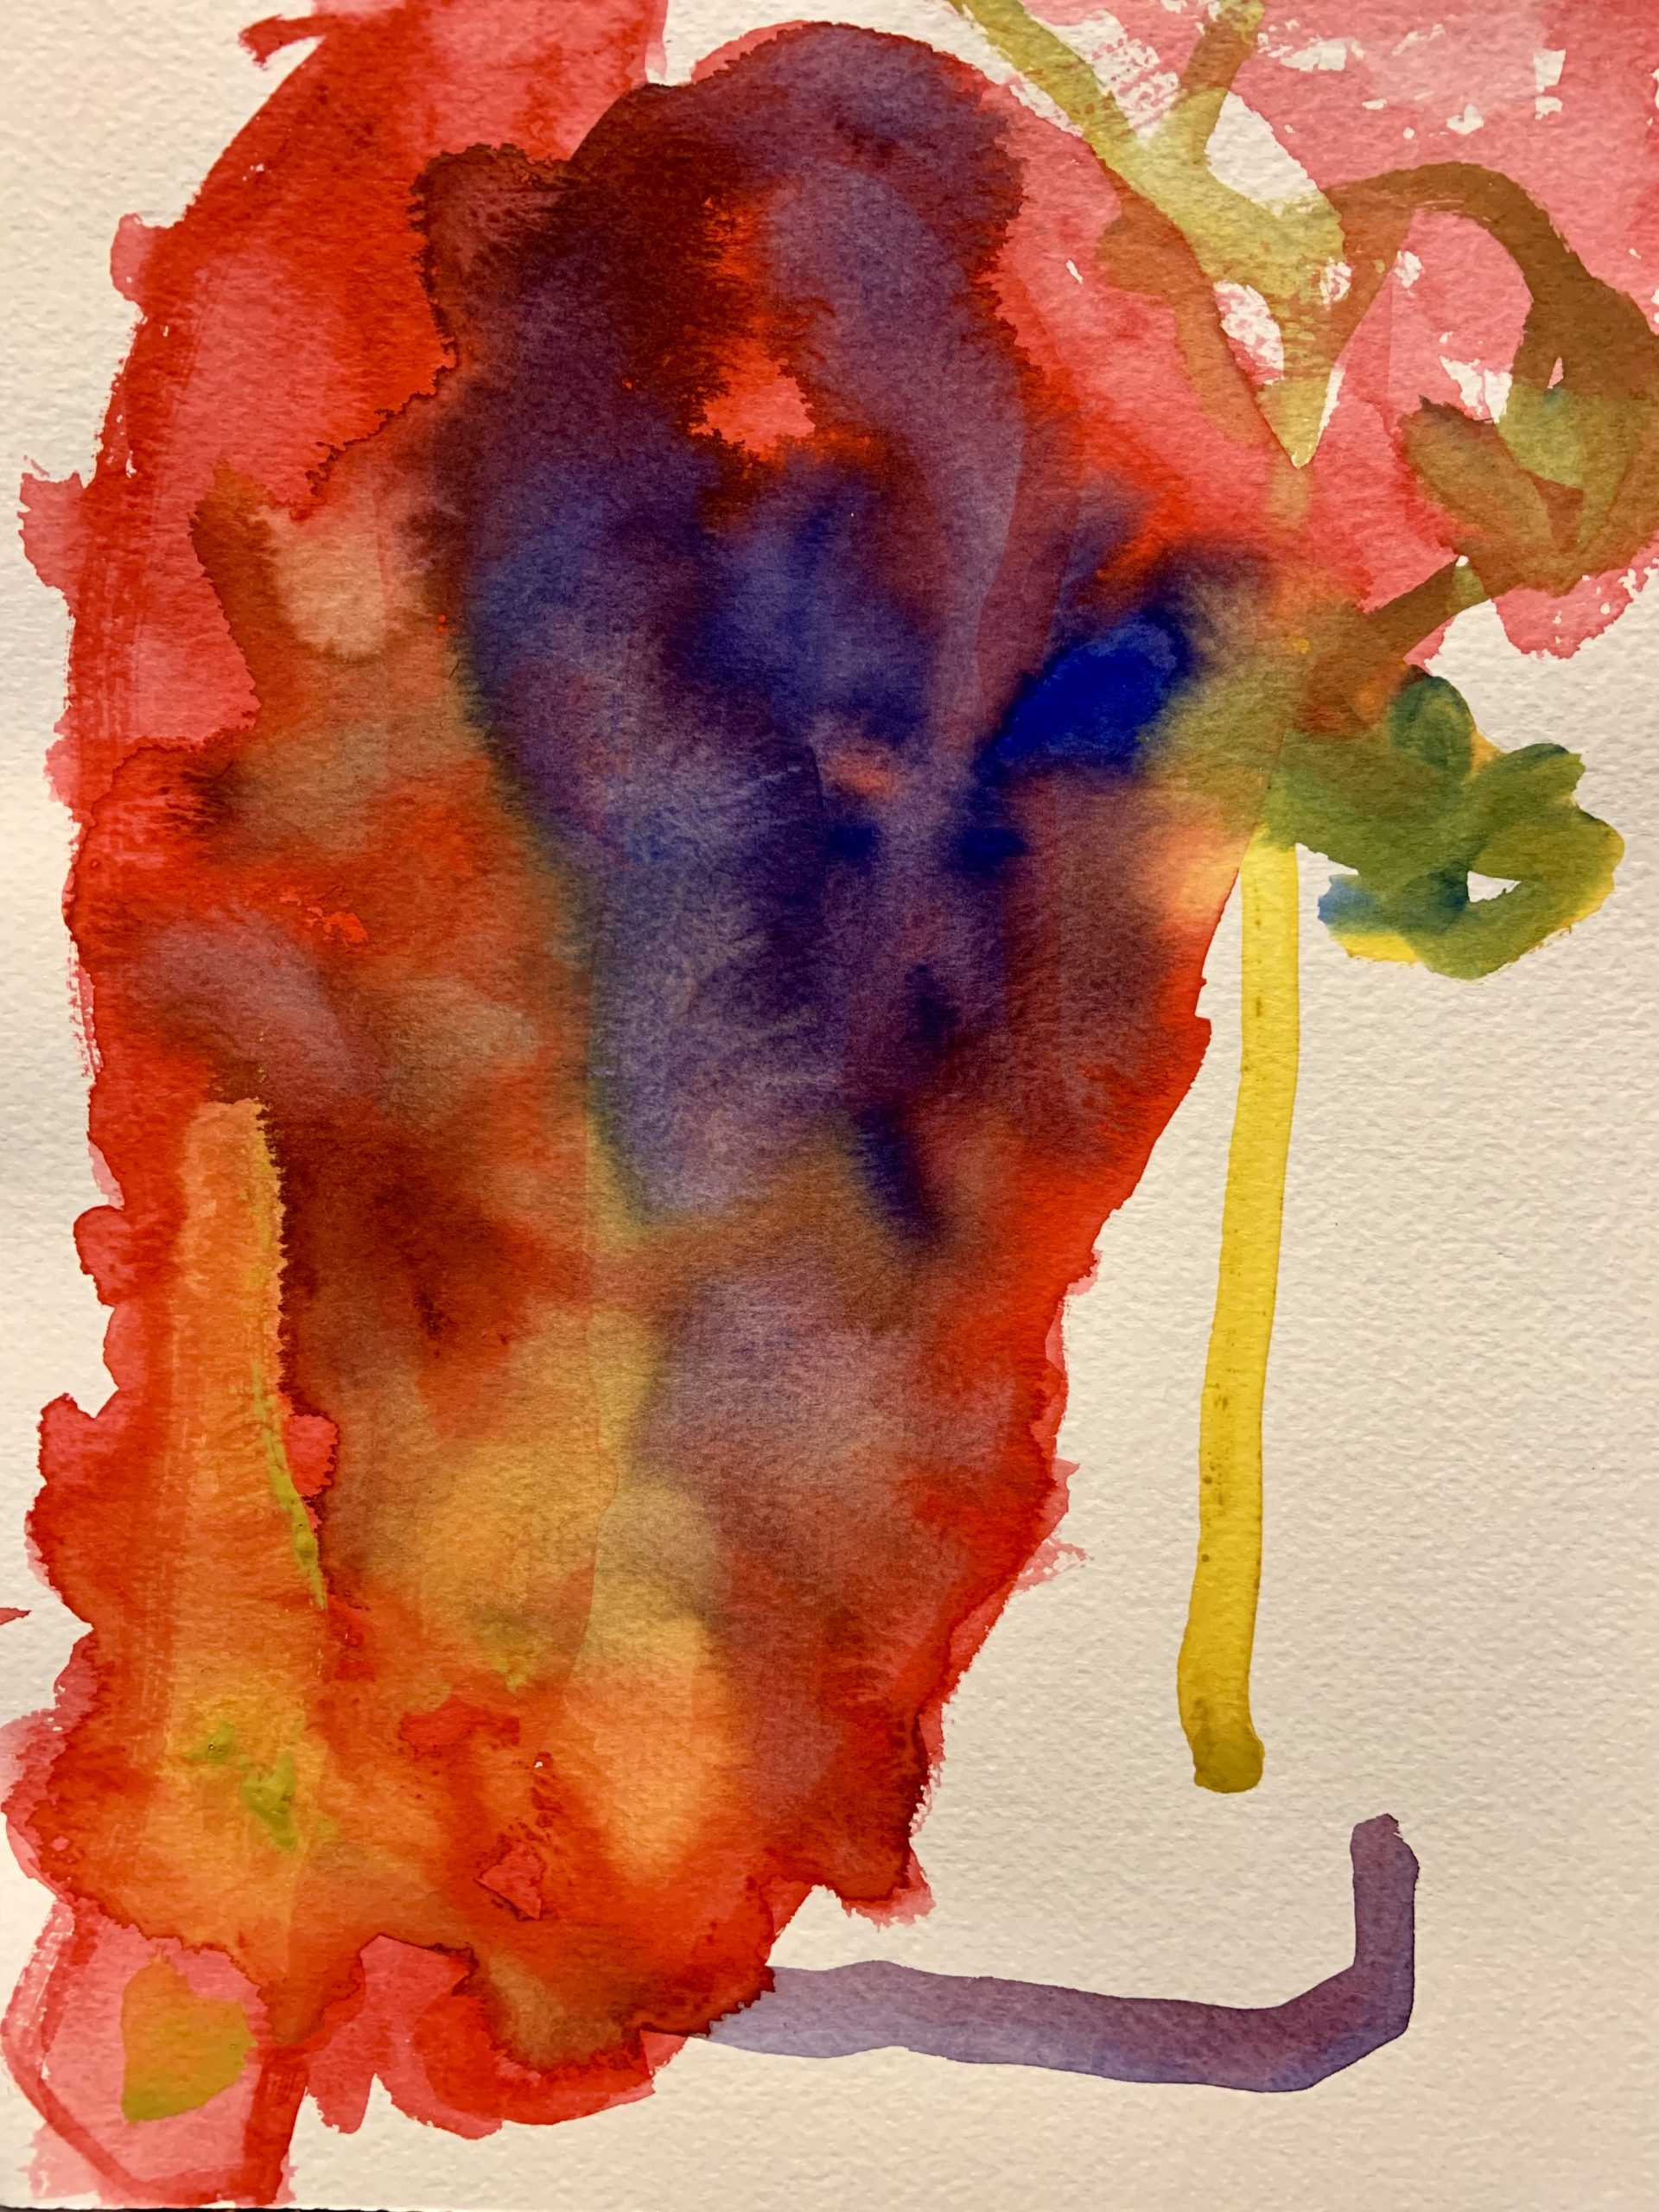 An abstract watercolor painting